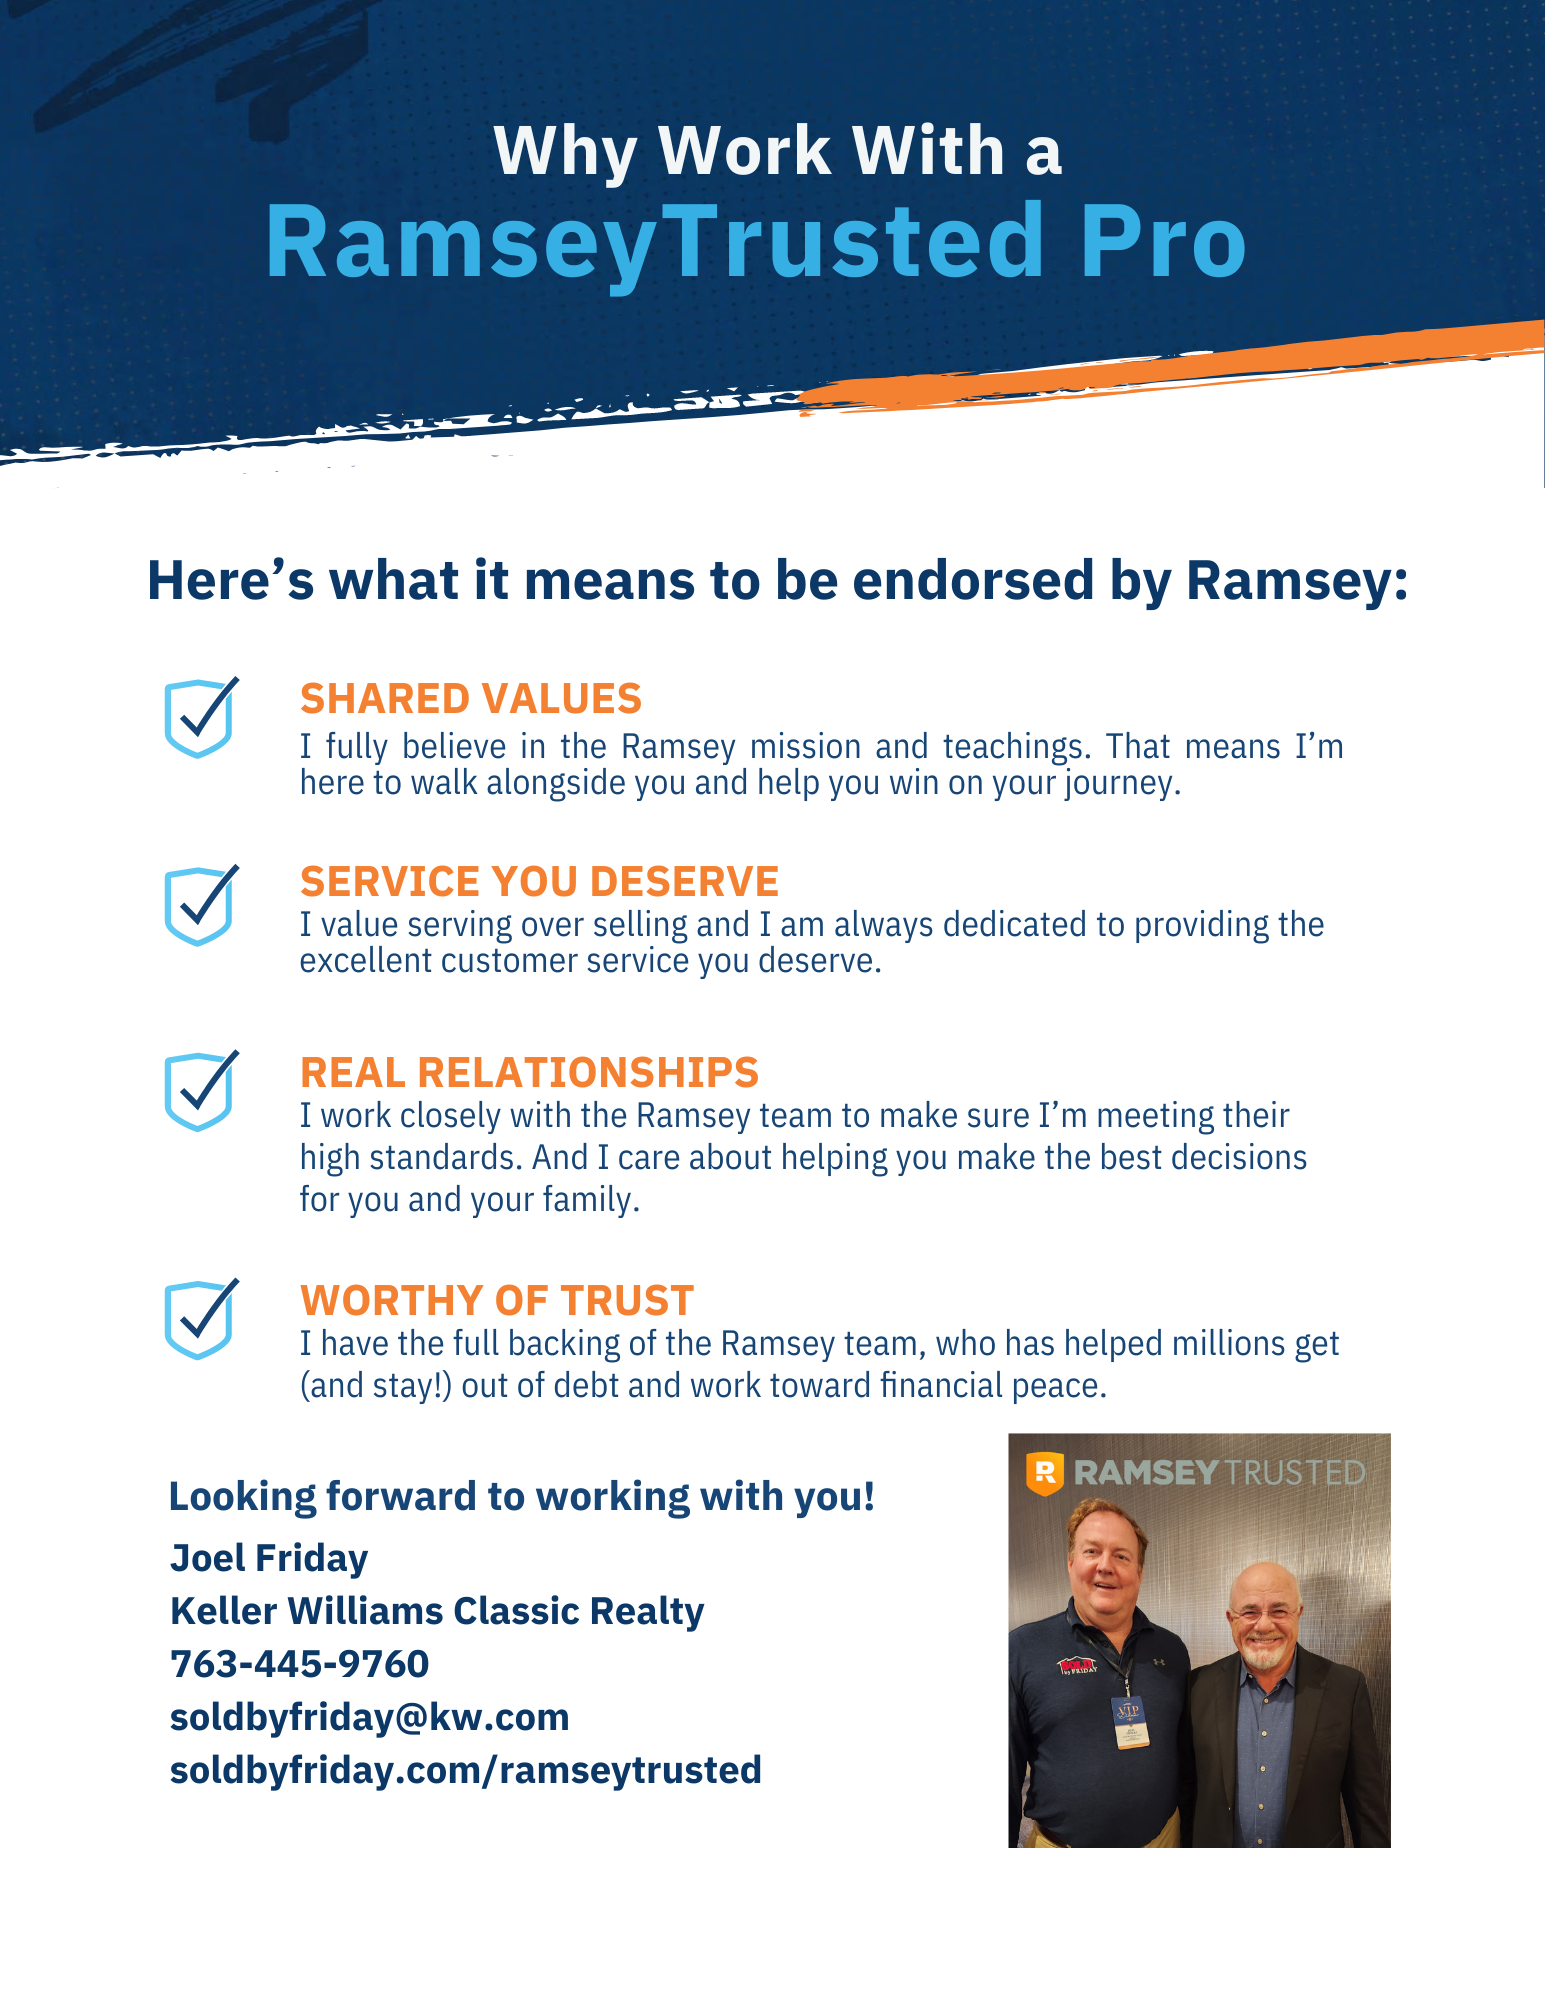 Dave Ramsey and Joel Friday your Ramsey Trusted realtor